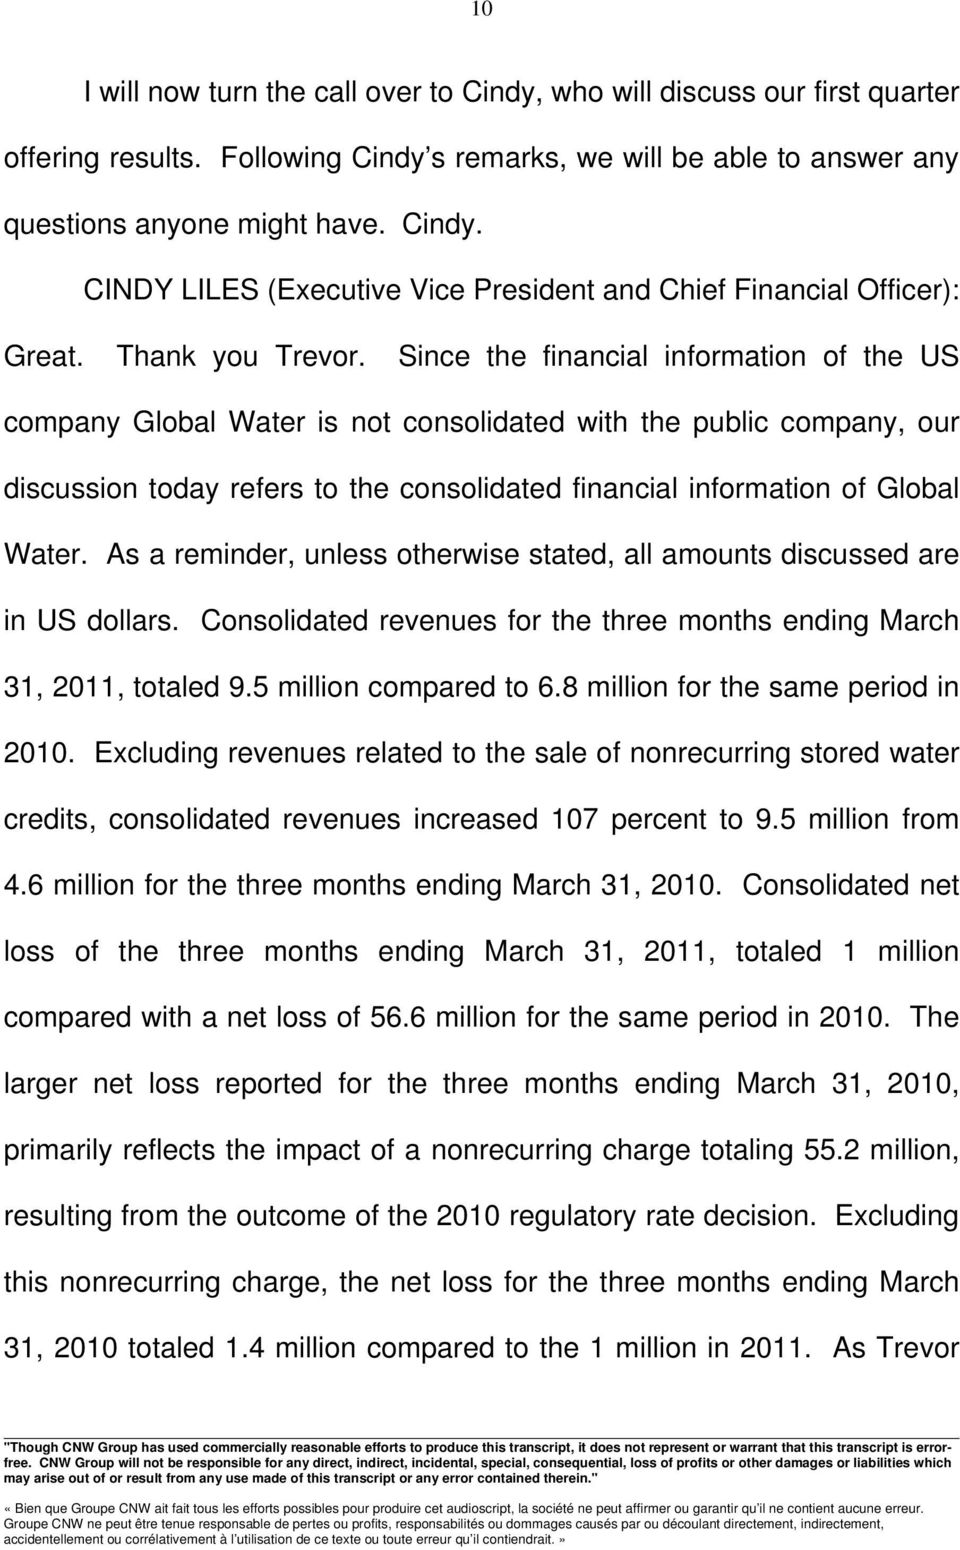 Since the financial information of the US company Global Water is not consolidated with the public company, our discussion today refers to the consolidated financial information of Global Water.